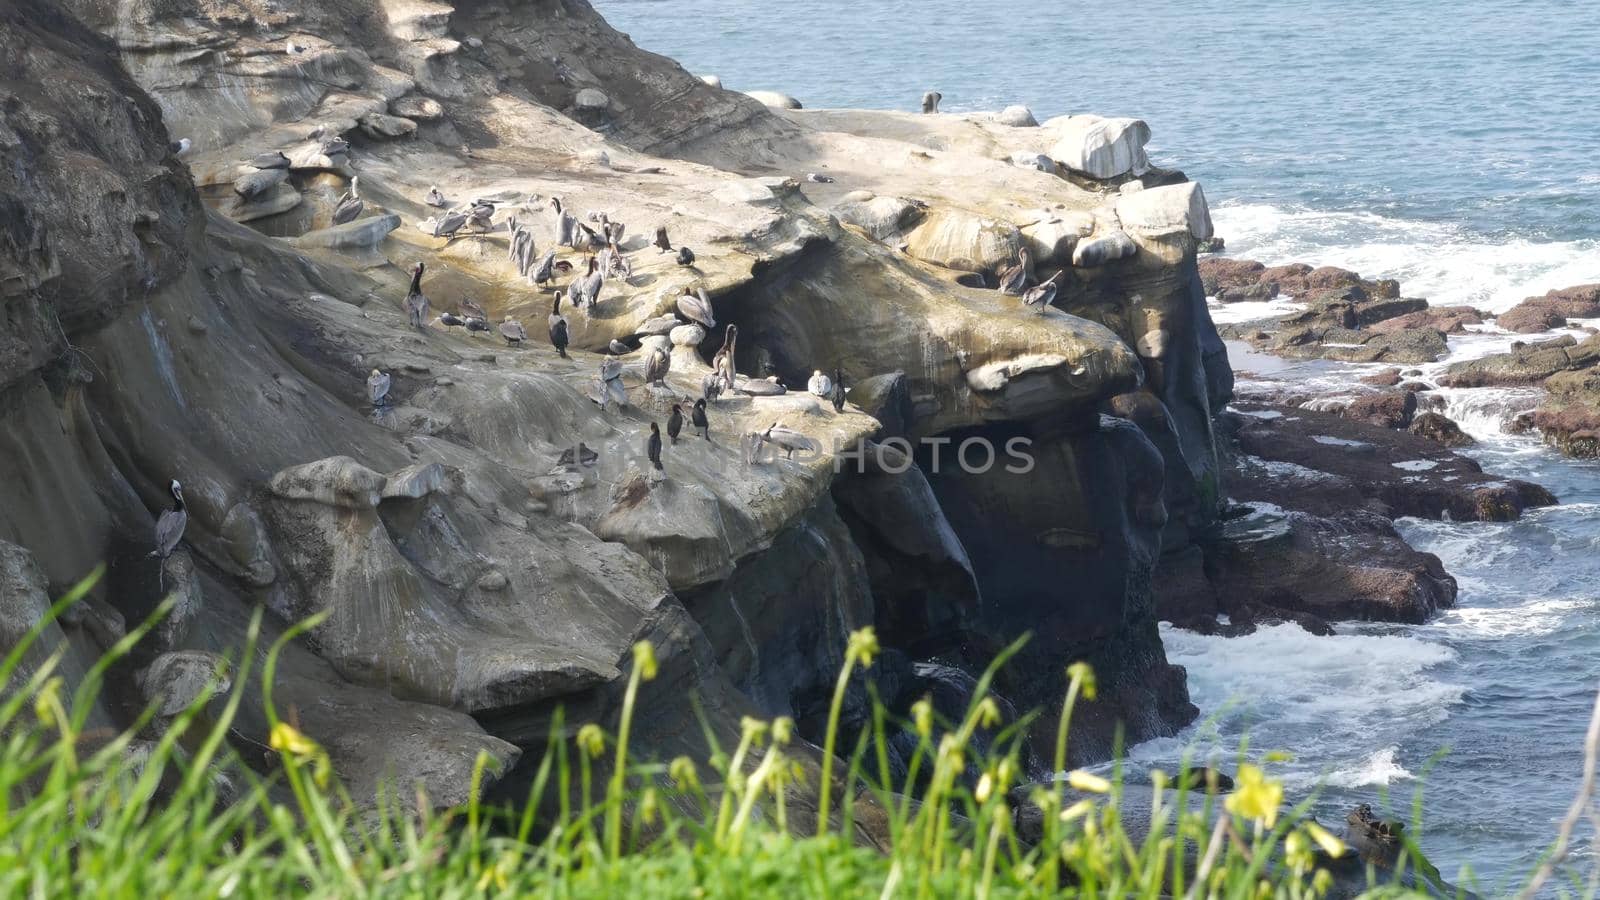 Brown pelicans with throat pouch and double-crested cormorants after fishing, rock in La Jolla Cove. Sea bird with large beak on cliff over pacific ocean in natural habitat, San Diego, California USA by DogoraSun